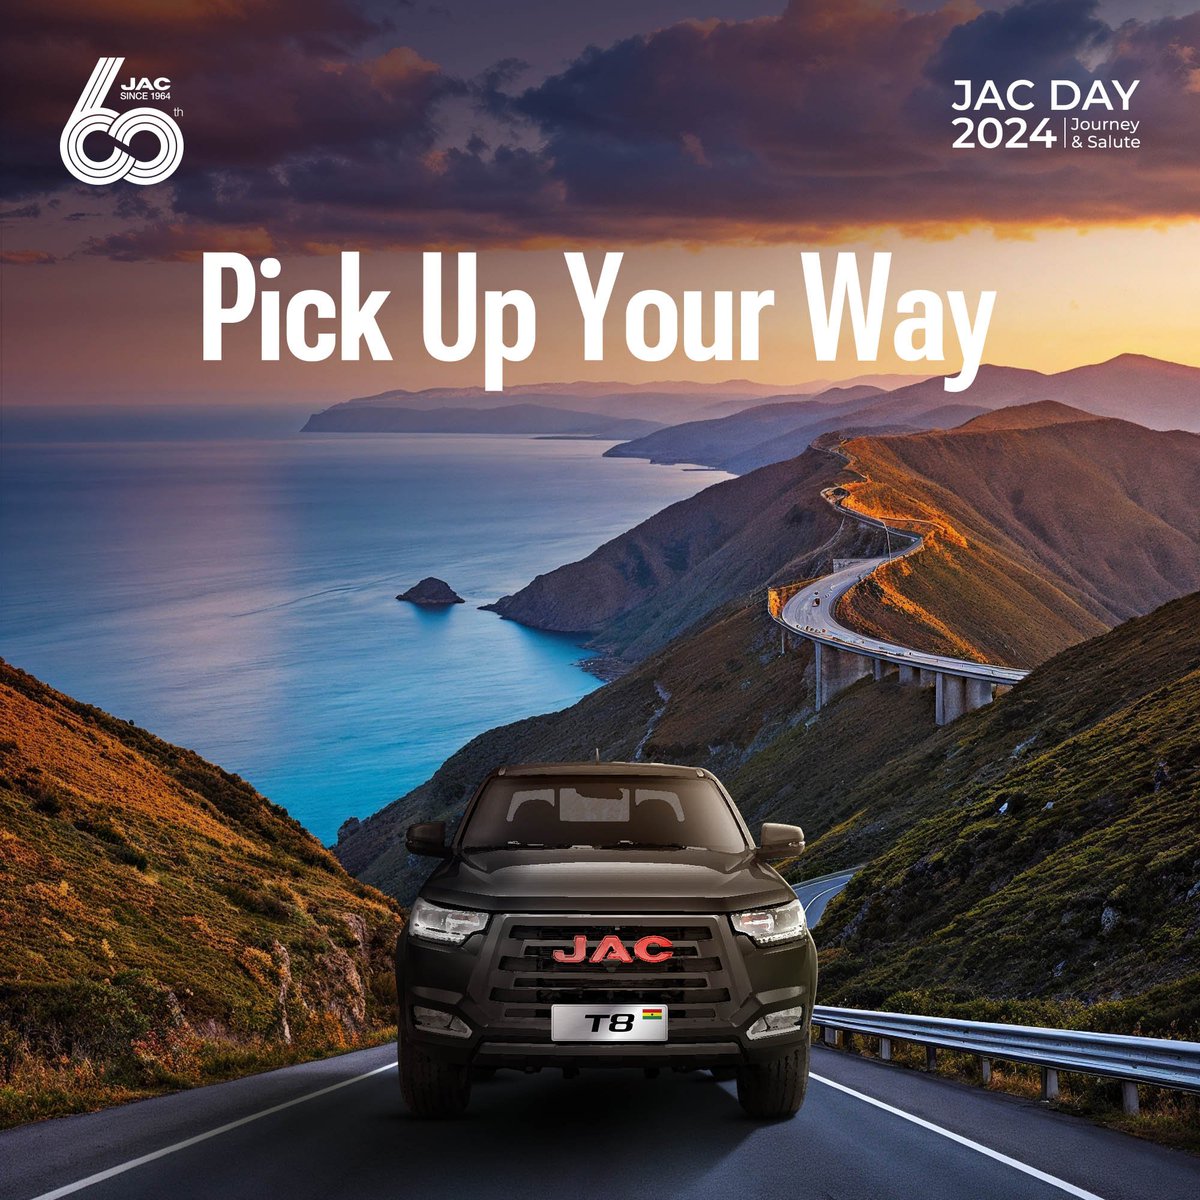 Exciting announcement on the horizon! As we gear up, we're proud to join our global partners in celebrating JAC Motors' 60th anniversary! #Anticipate #jacmotors